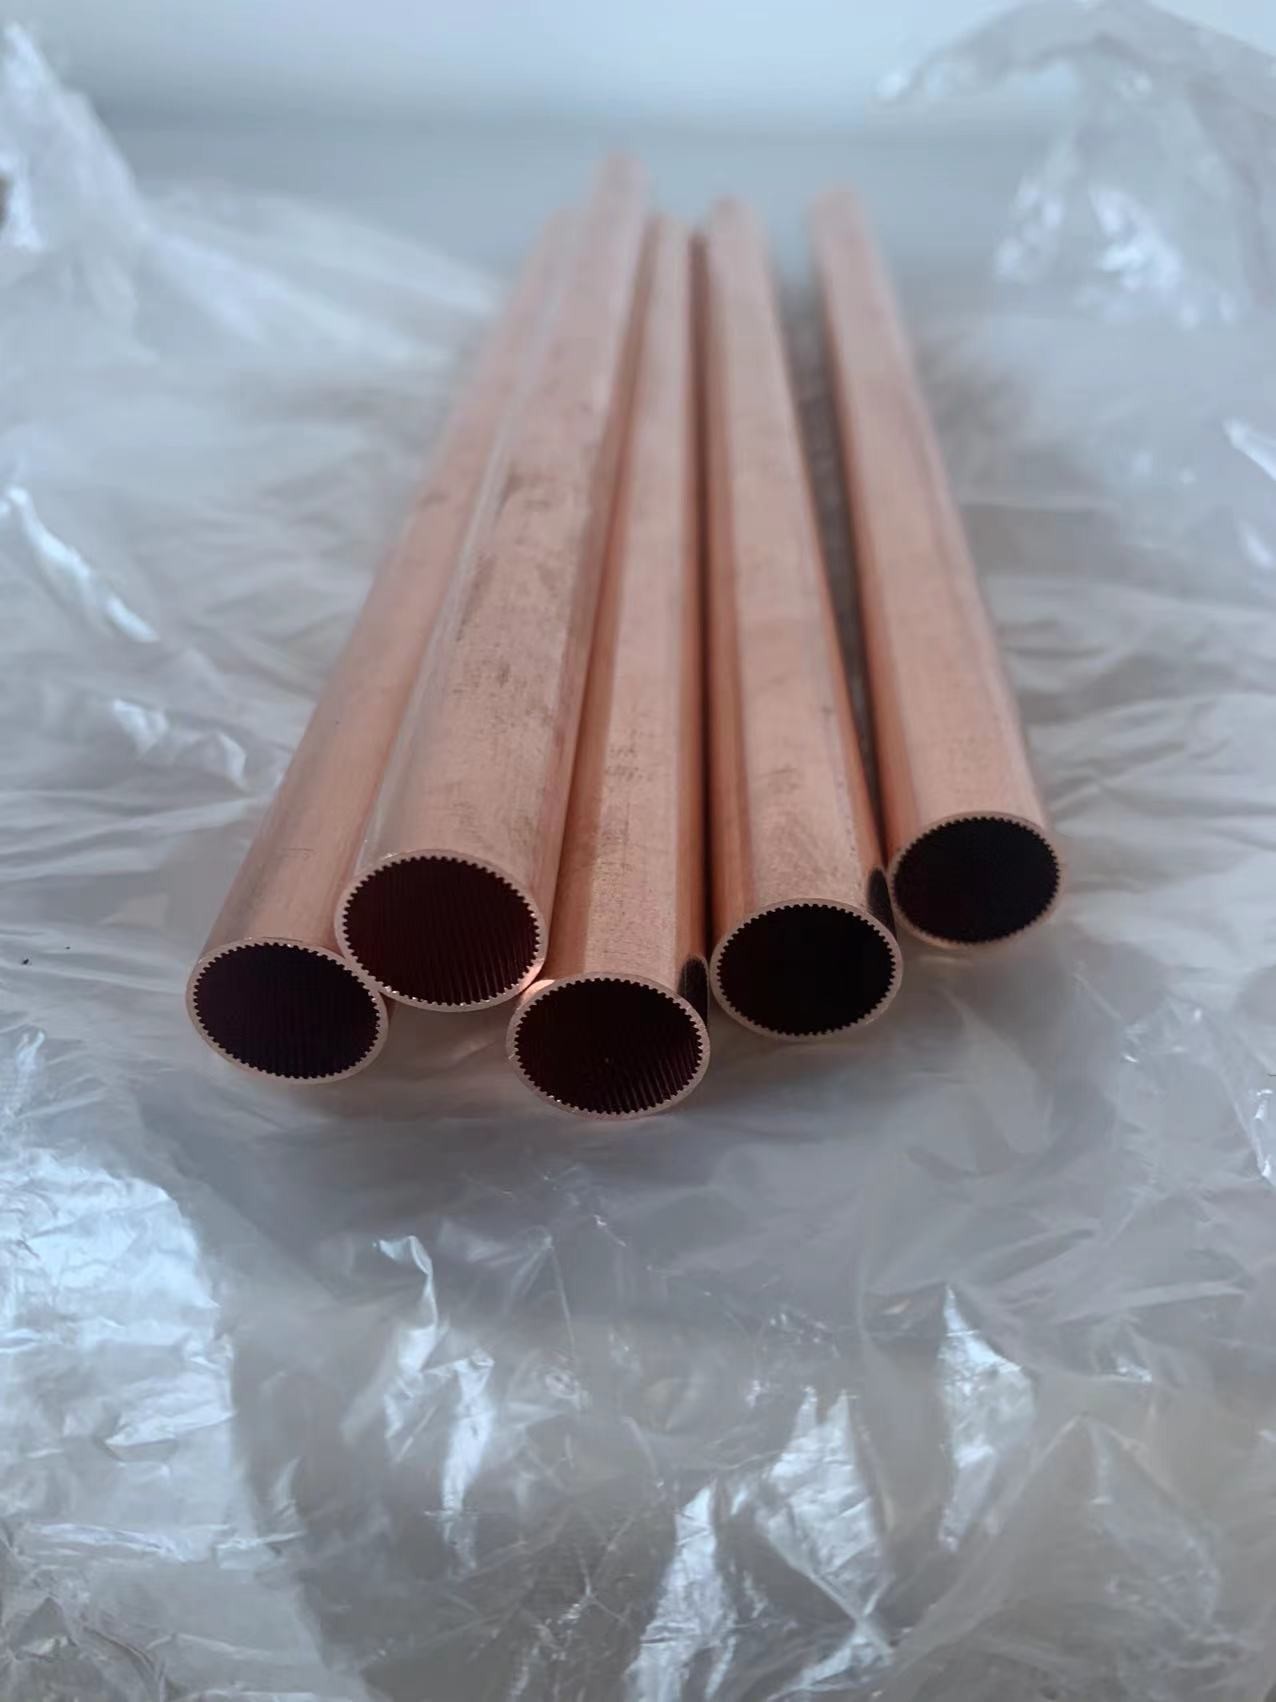 Wholesale Bended Grooved Brazing Copper Pipes 150x190mm For Air Conditioner Heatsink from china suppliers